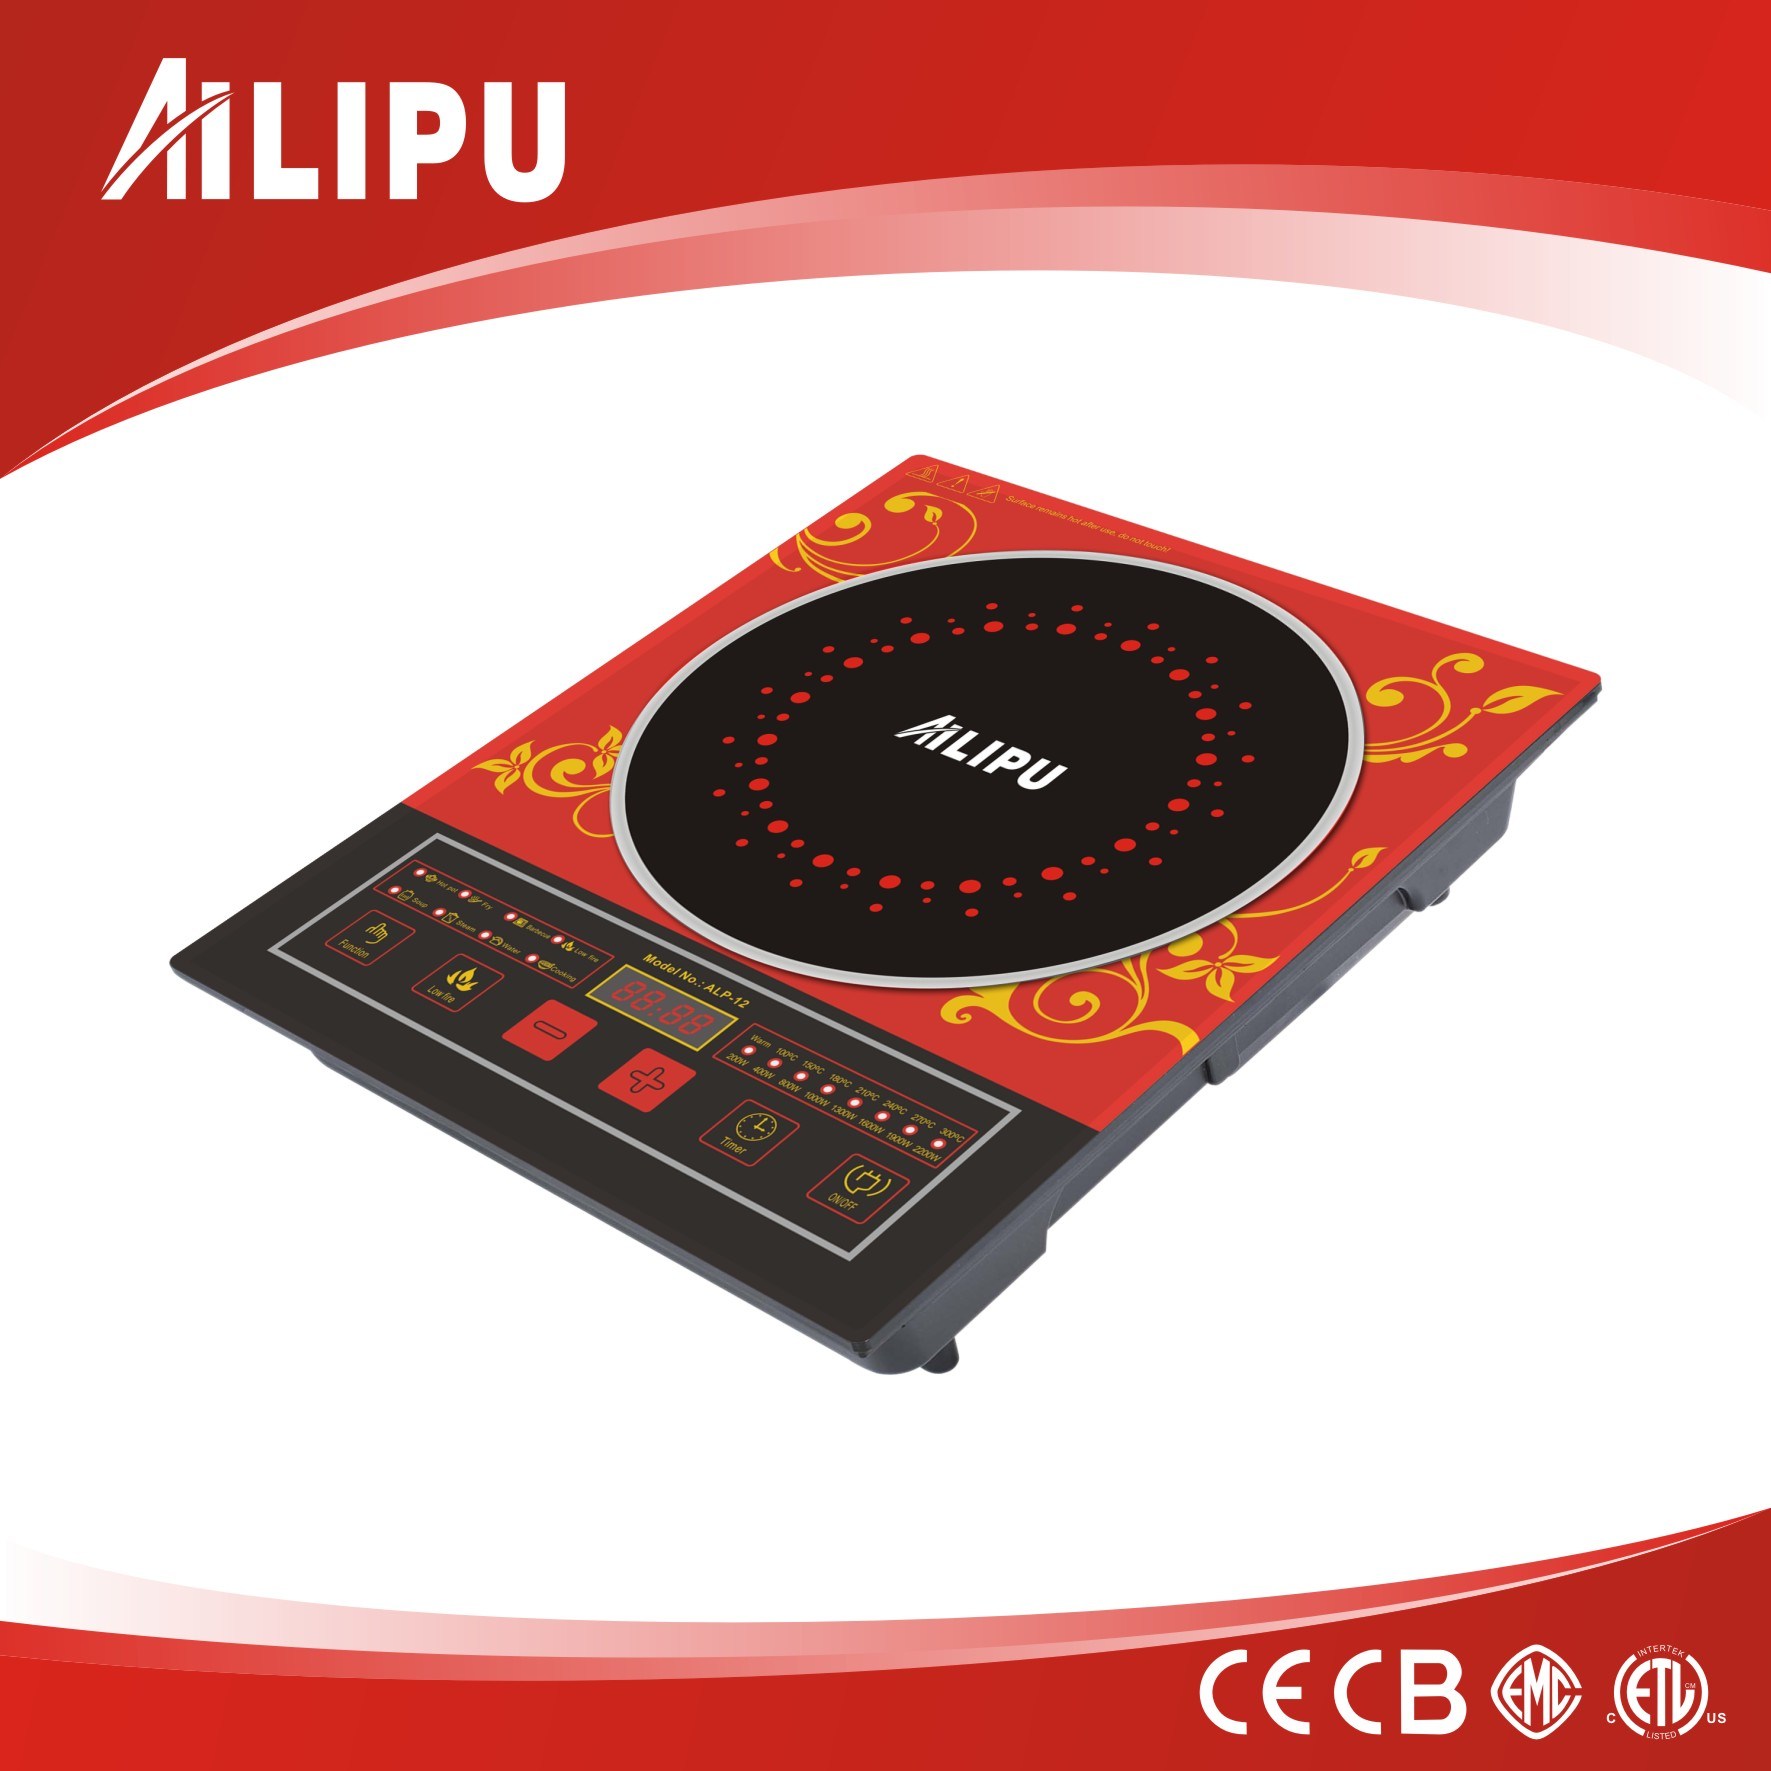 Ailipu Best Selling Induction Cooker for Syria Market (SM-A12)